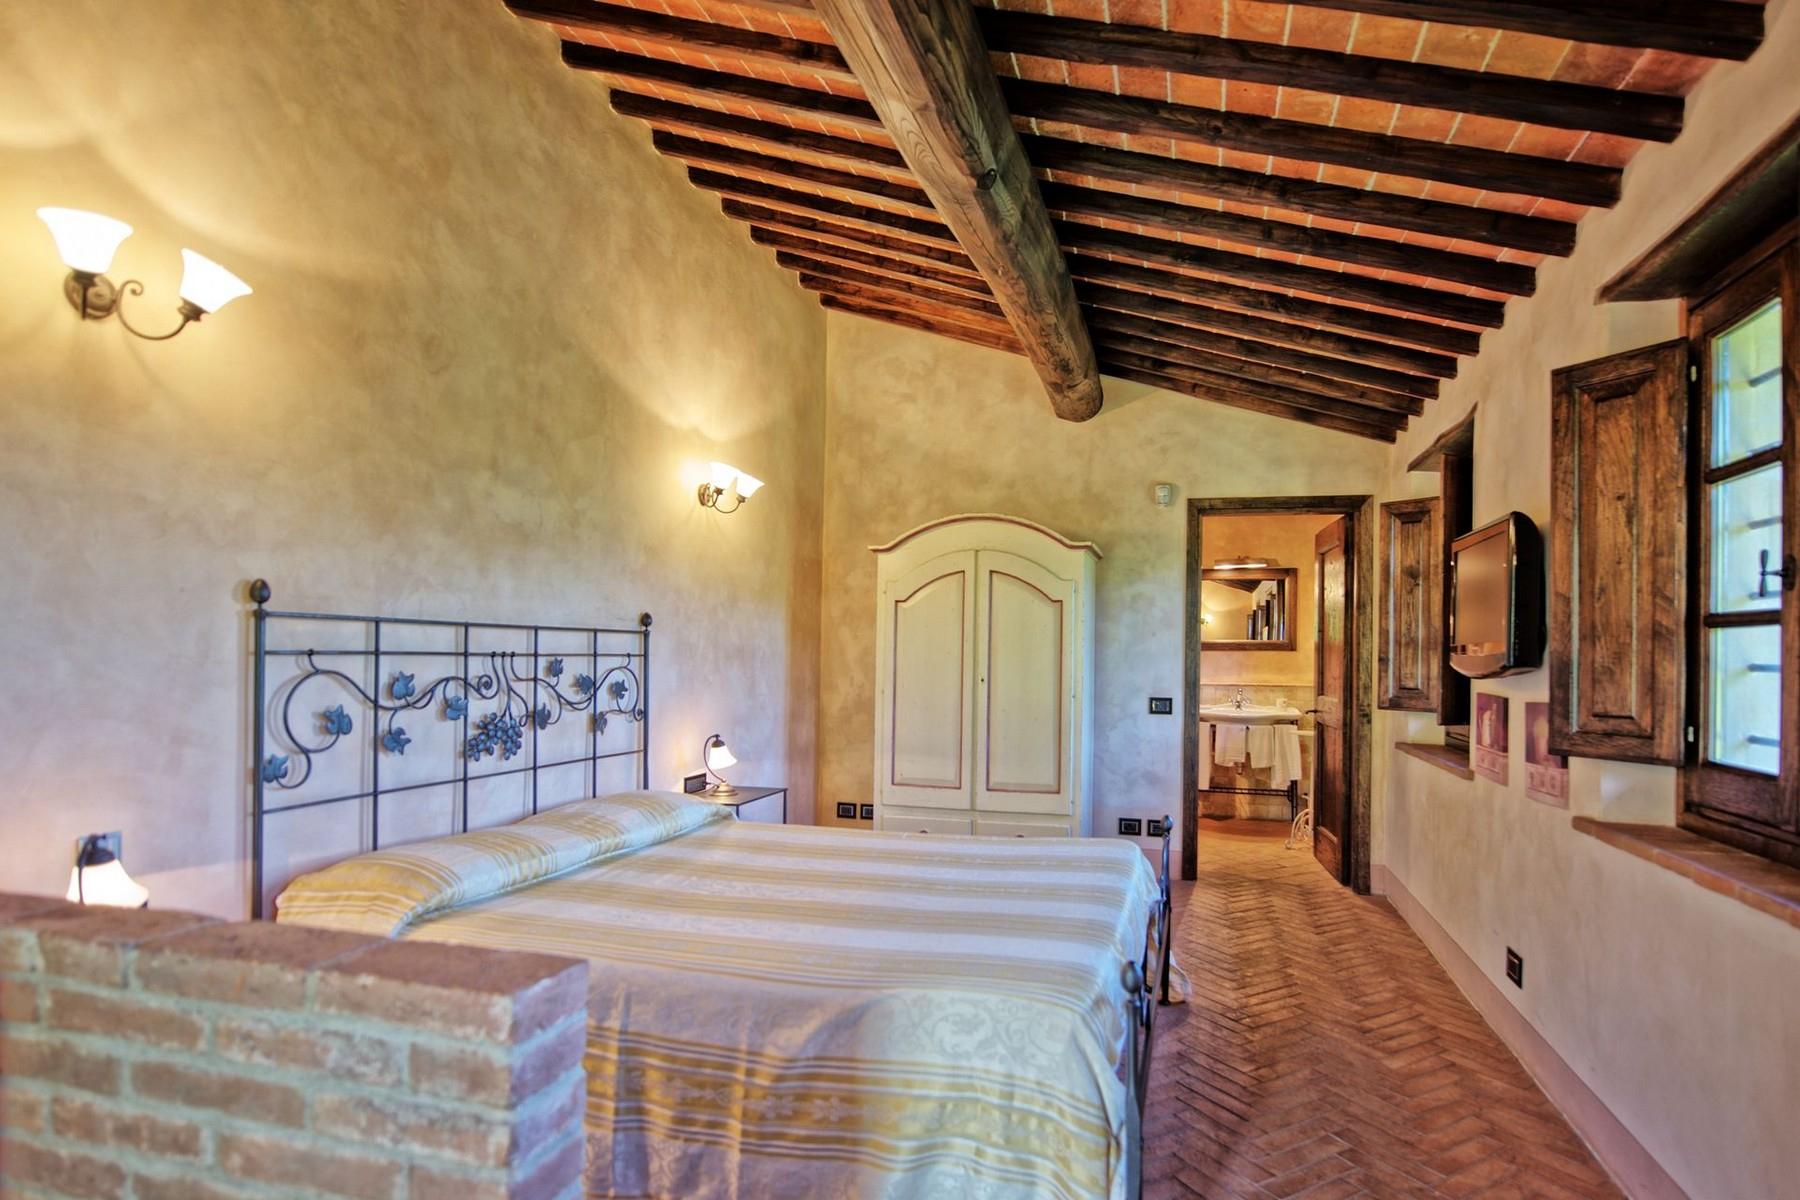 Farmhouse for sale in the Tuscan hills - 12